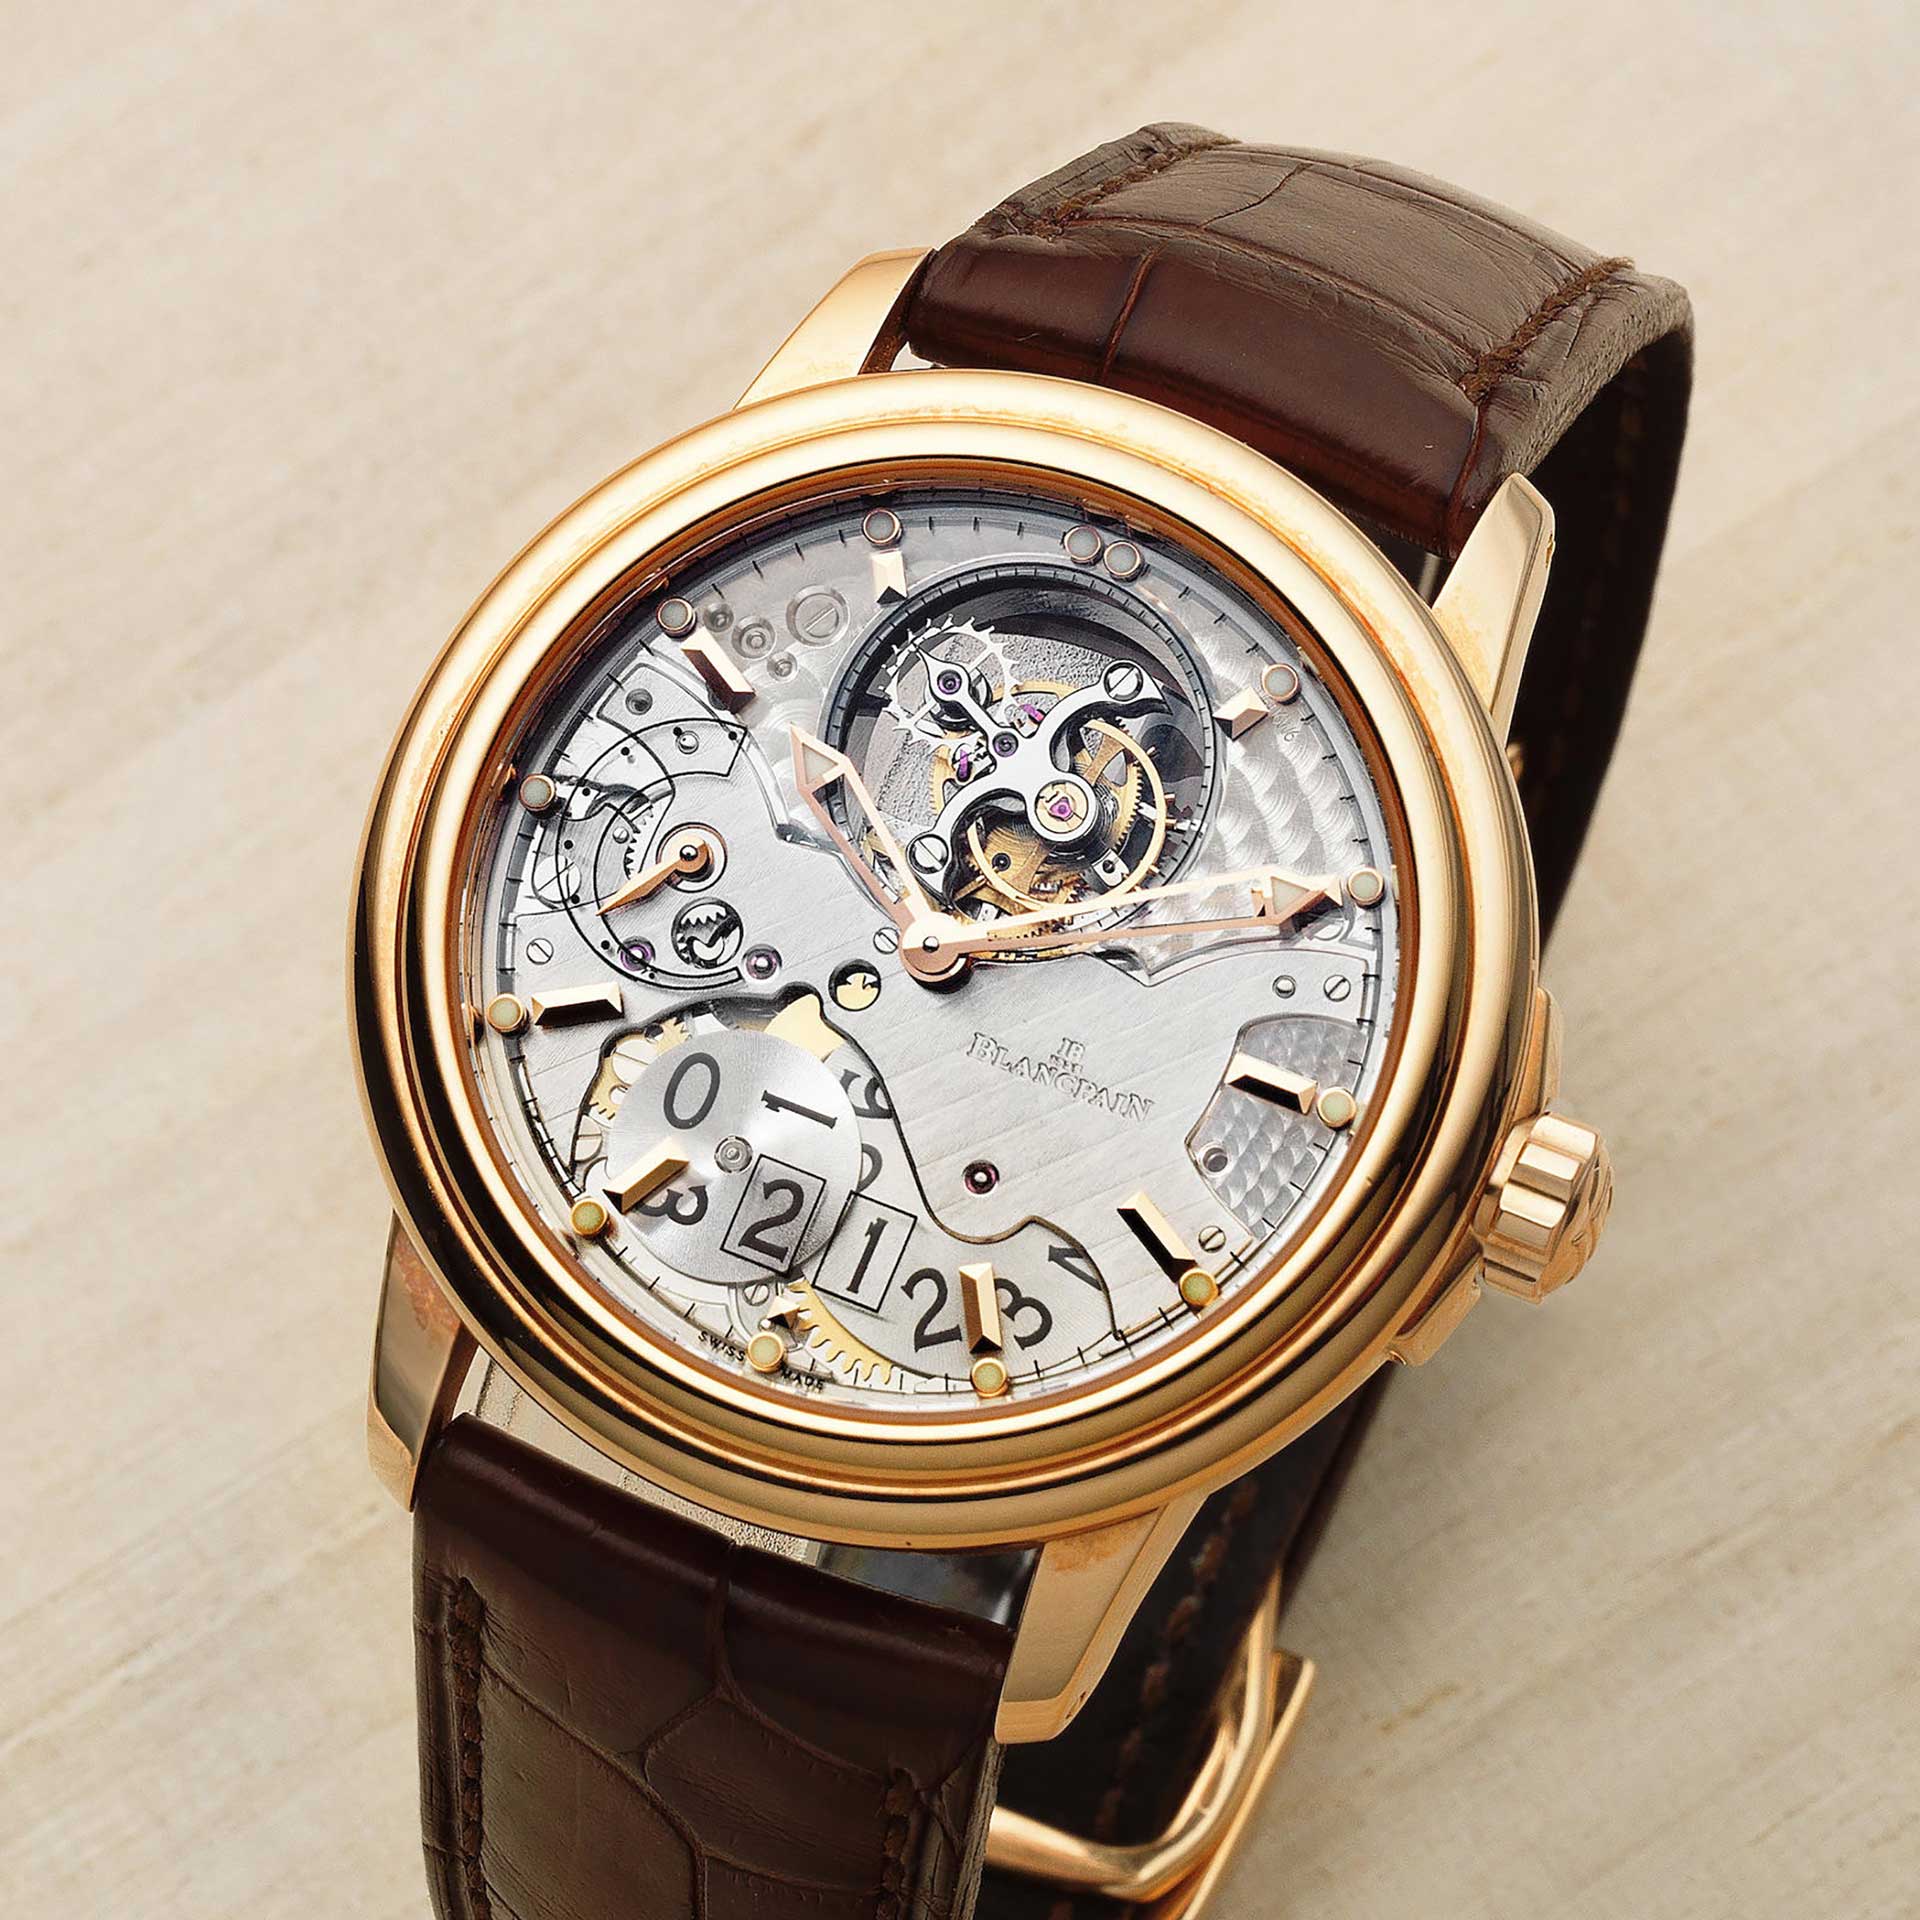 LOT 116 Blancpain 18k Rose Gold Automatic Semi-Skeletonised Tourbillon Calendar Wristwatch With 8 Day Power Reserve